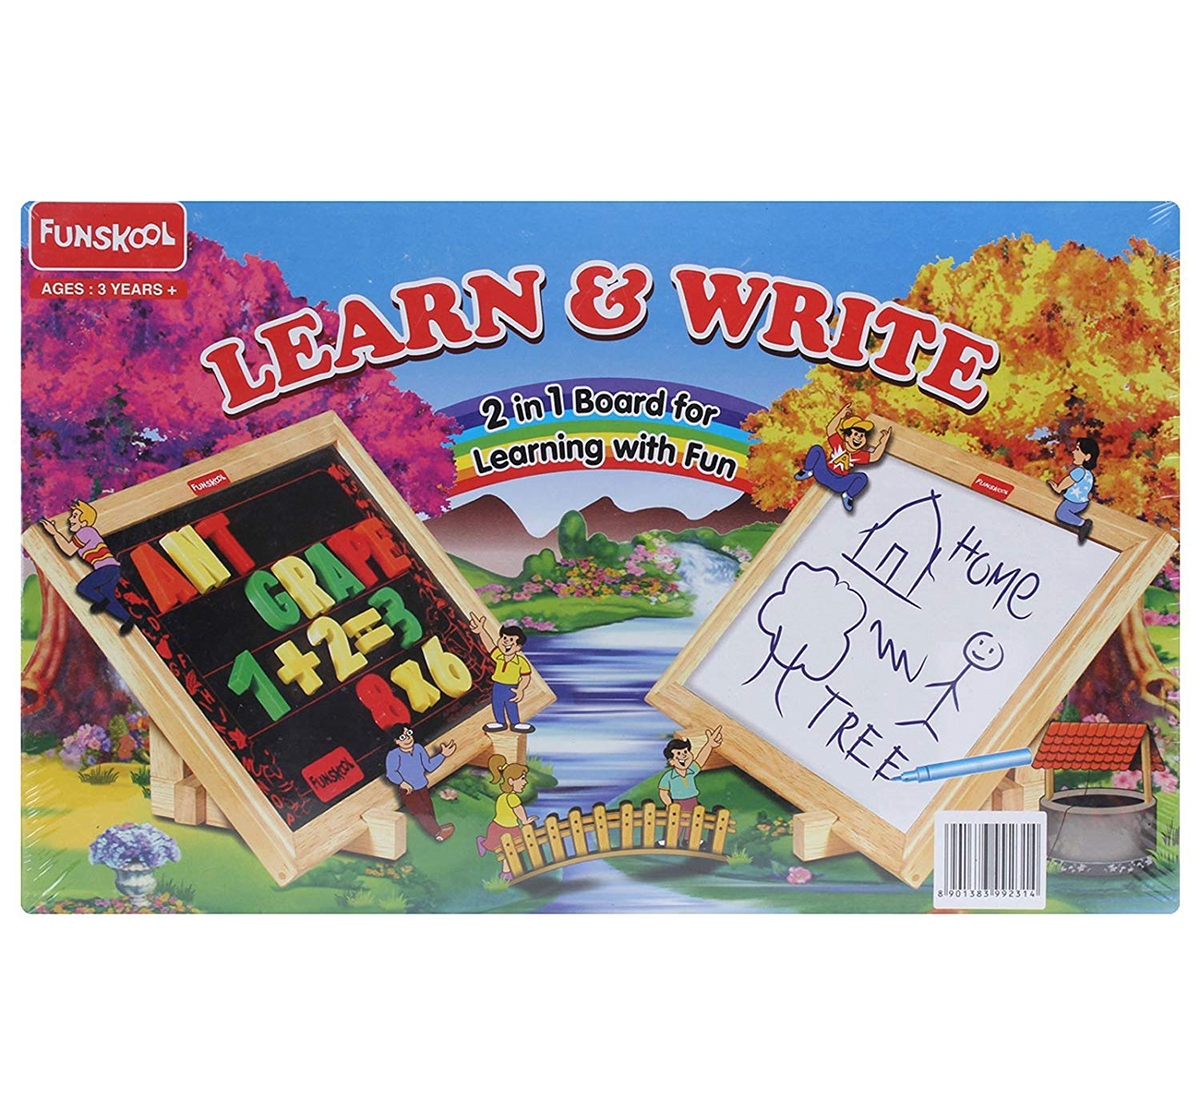 Giggles | Giggles Funskool Learn And Write Early Learner Toys for Kids age 3Y+ (White) 0